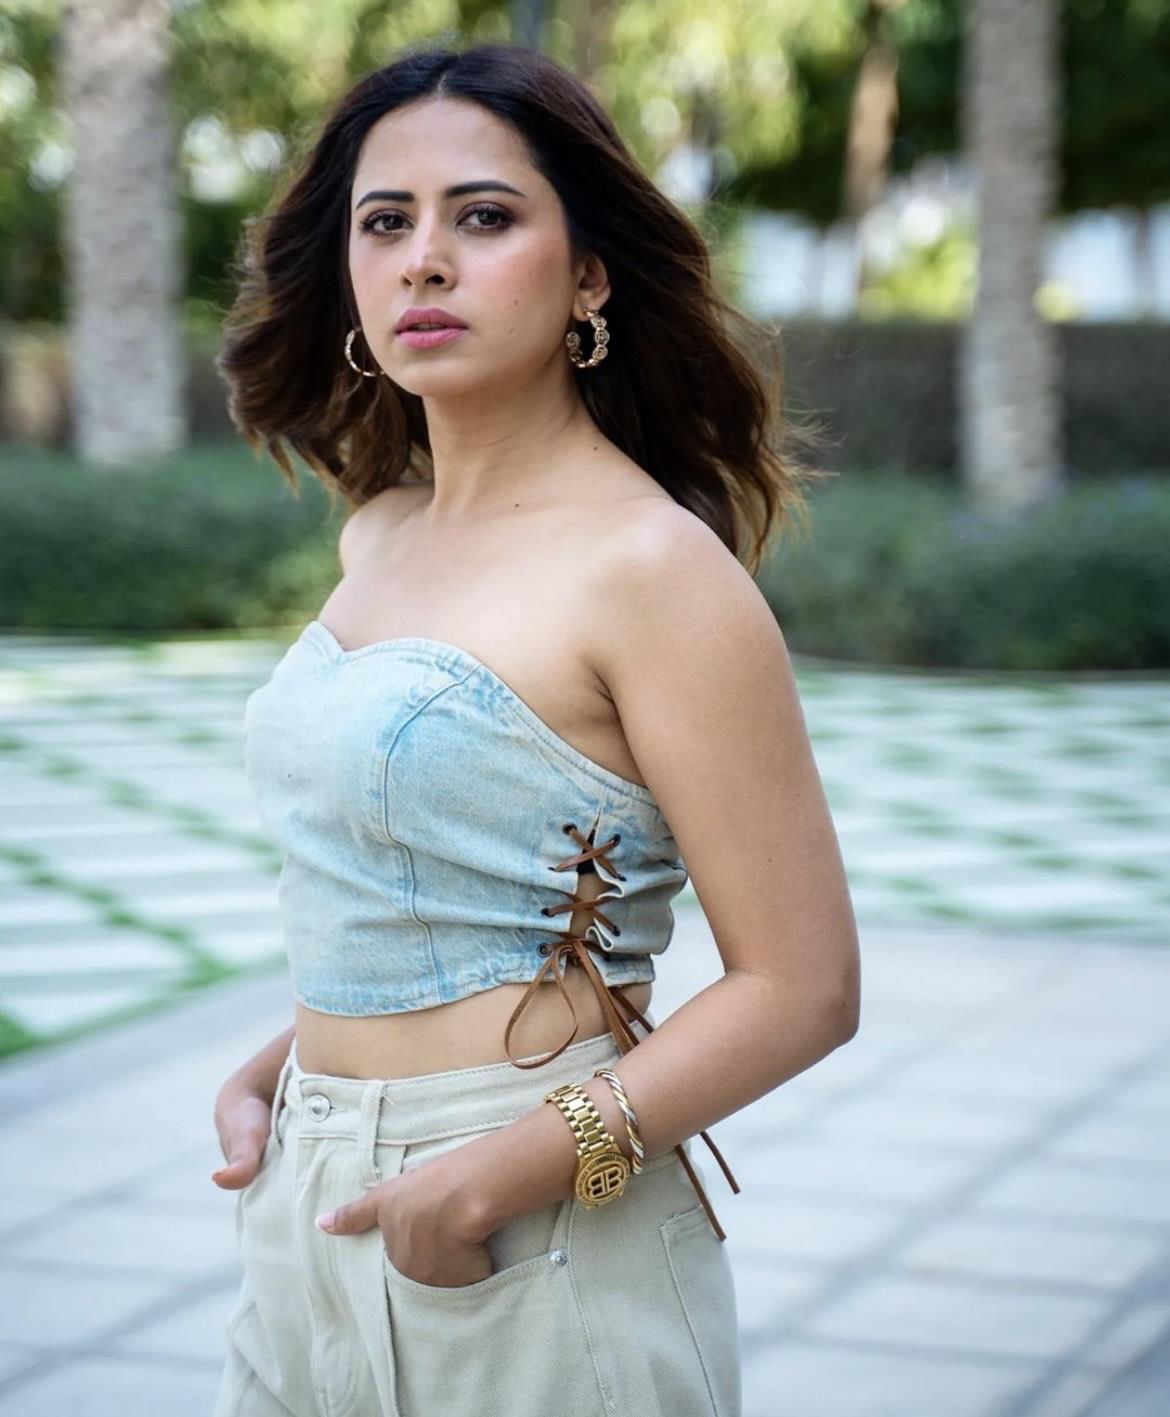 Sargun Mehta is happy as there is no paparazzi culture in Punjabi cinema